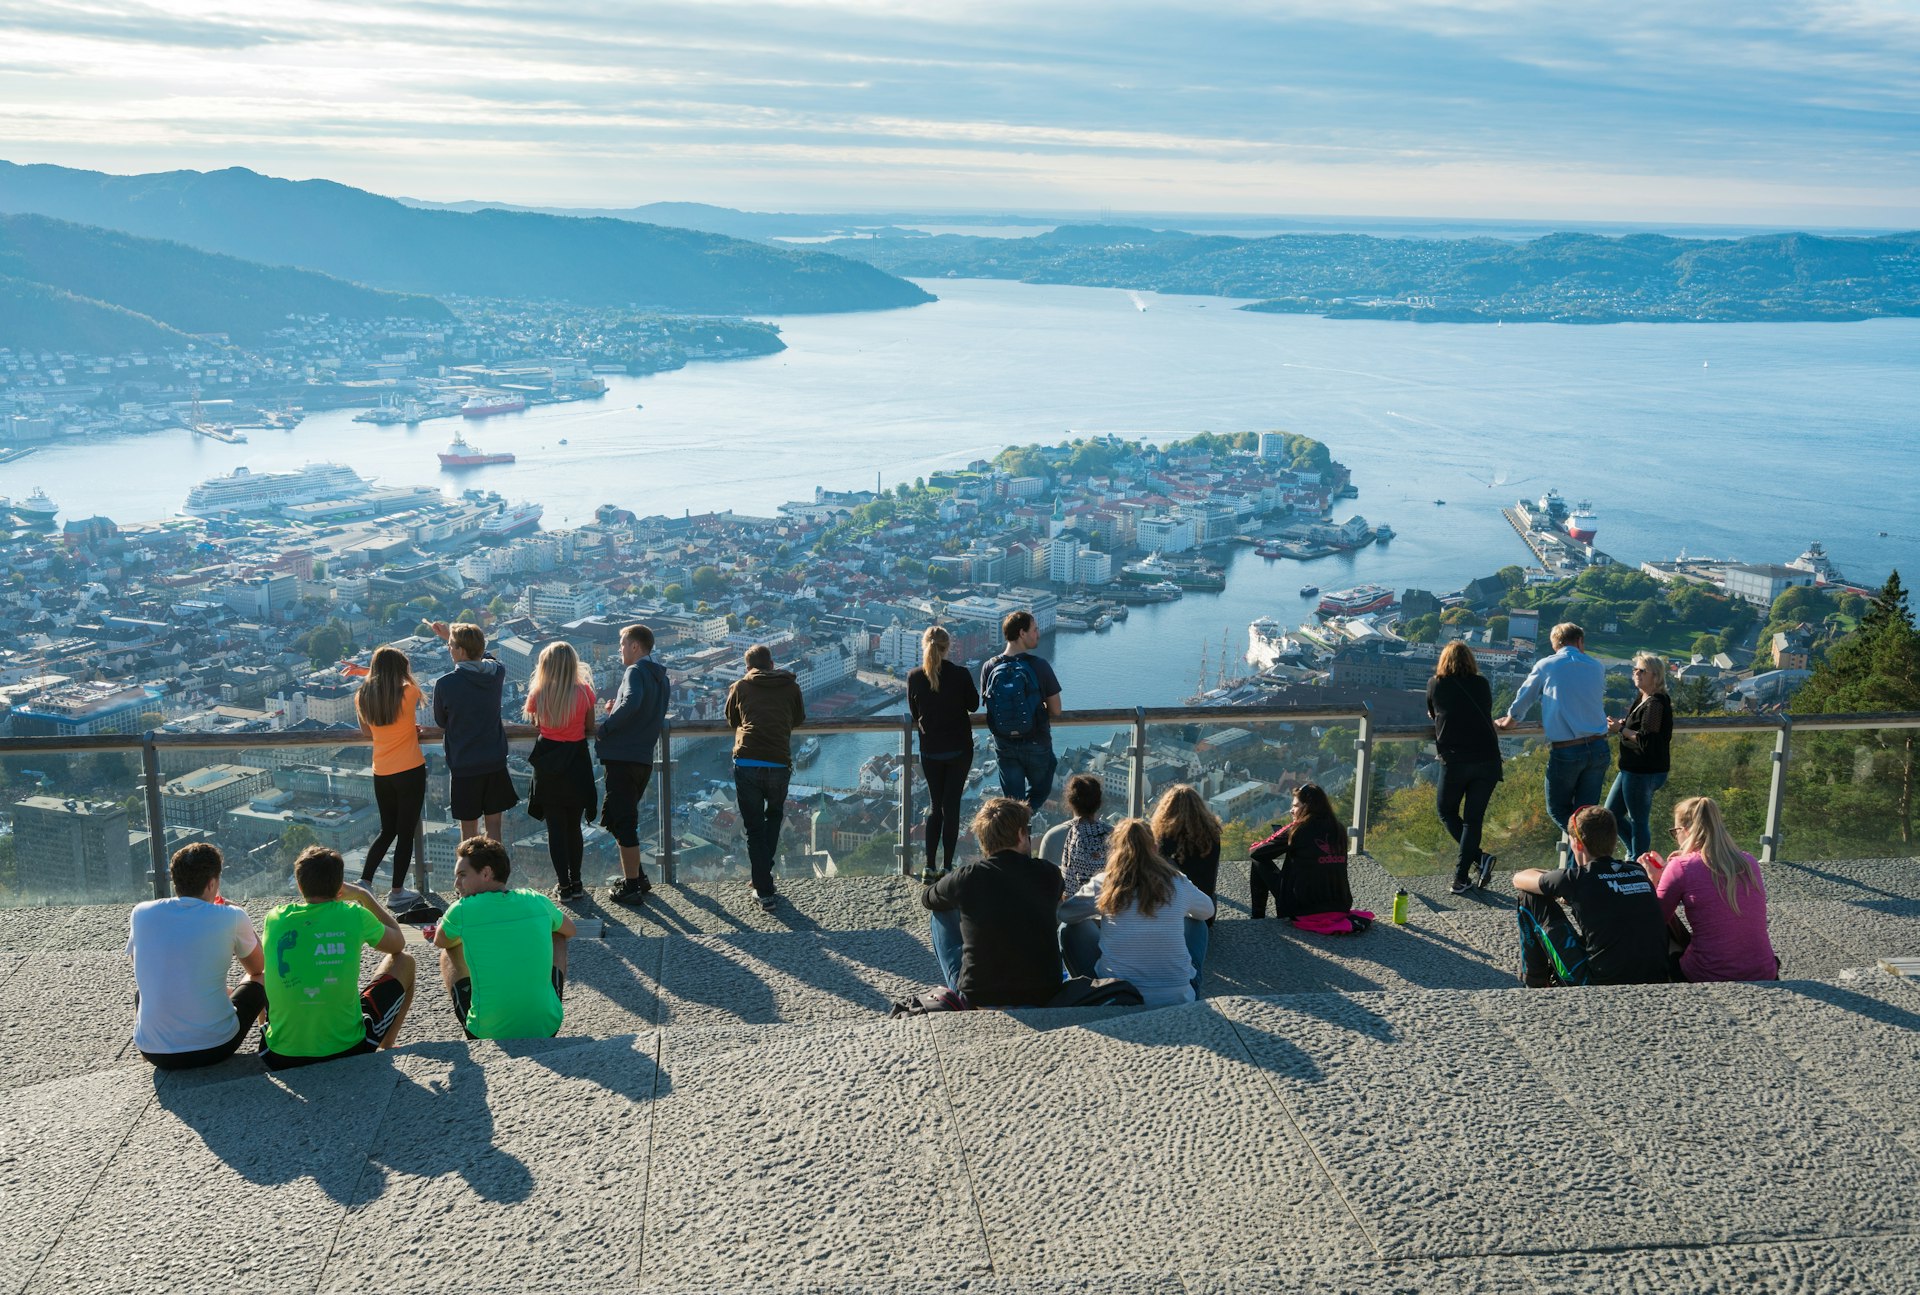 Tourists admire the view from Mt Fløyen over the city of Bergen, Norway